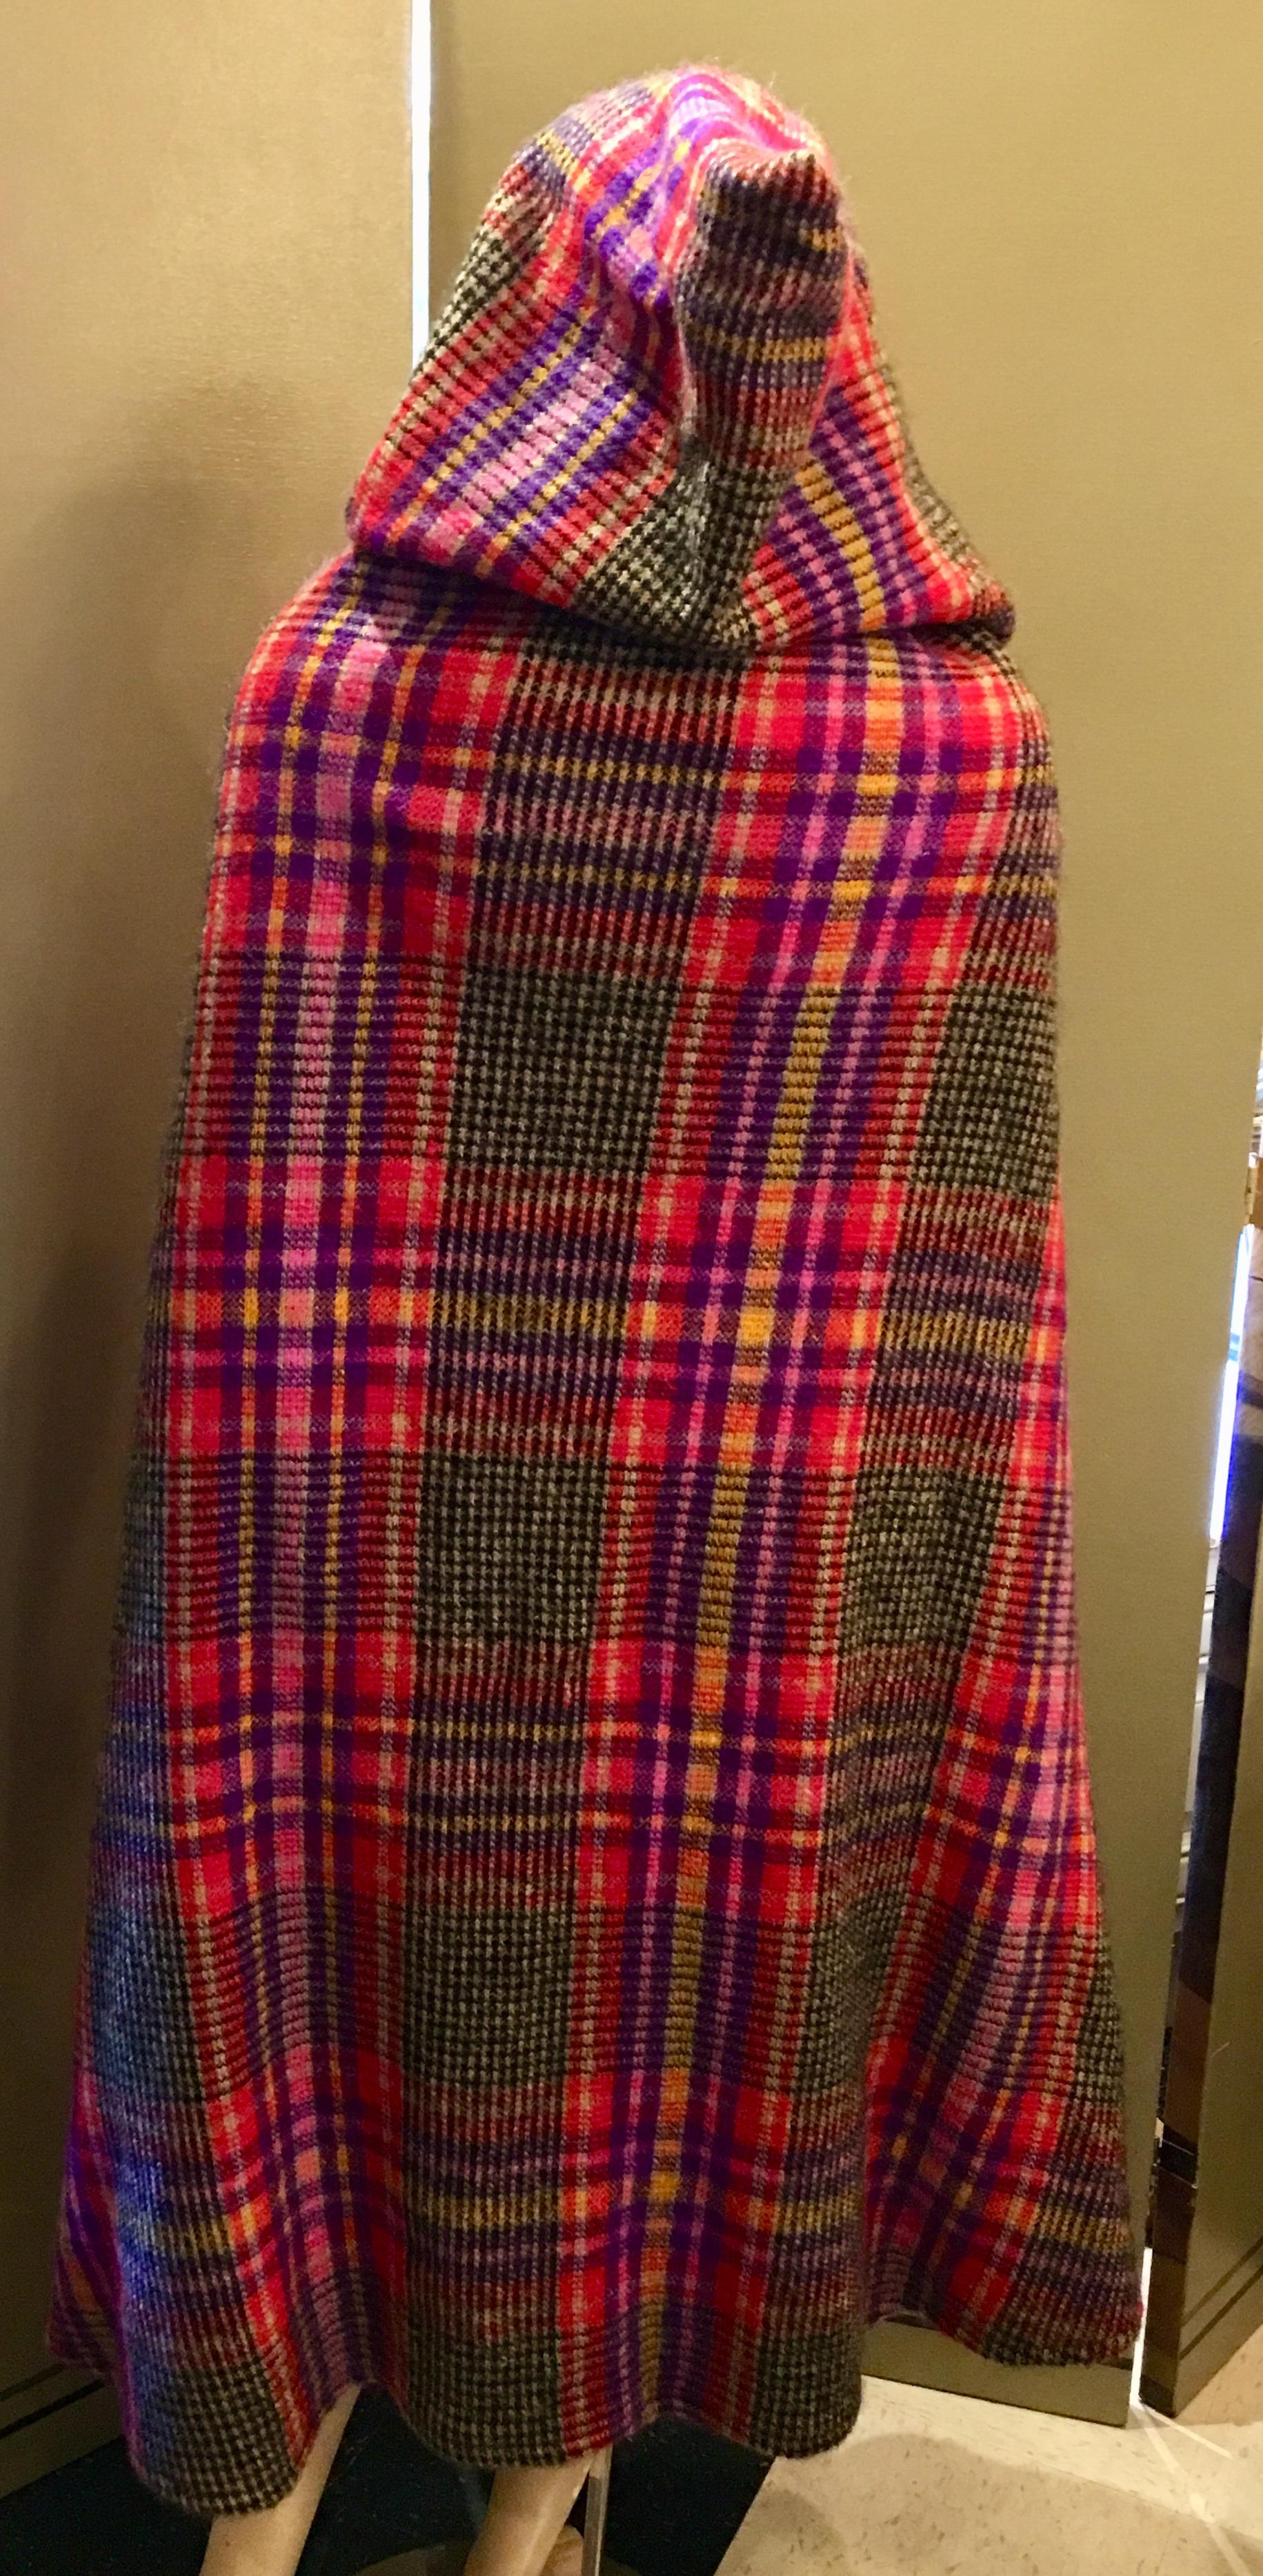 Couture Missoni Plaid Knitted Hooded Wool Cape Cloak with Orange Label In Excellent Condition For Sale In Tustin, CA